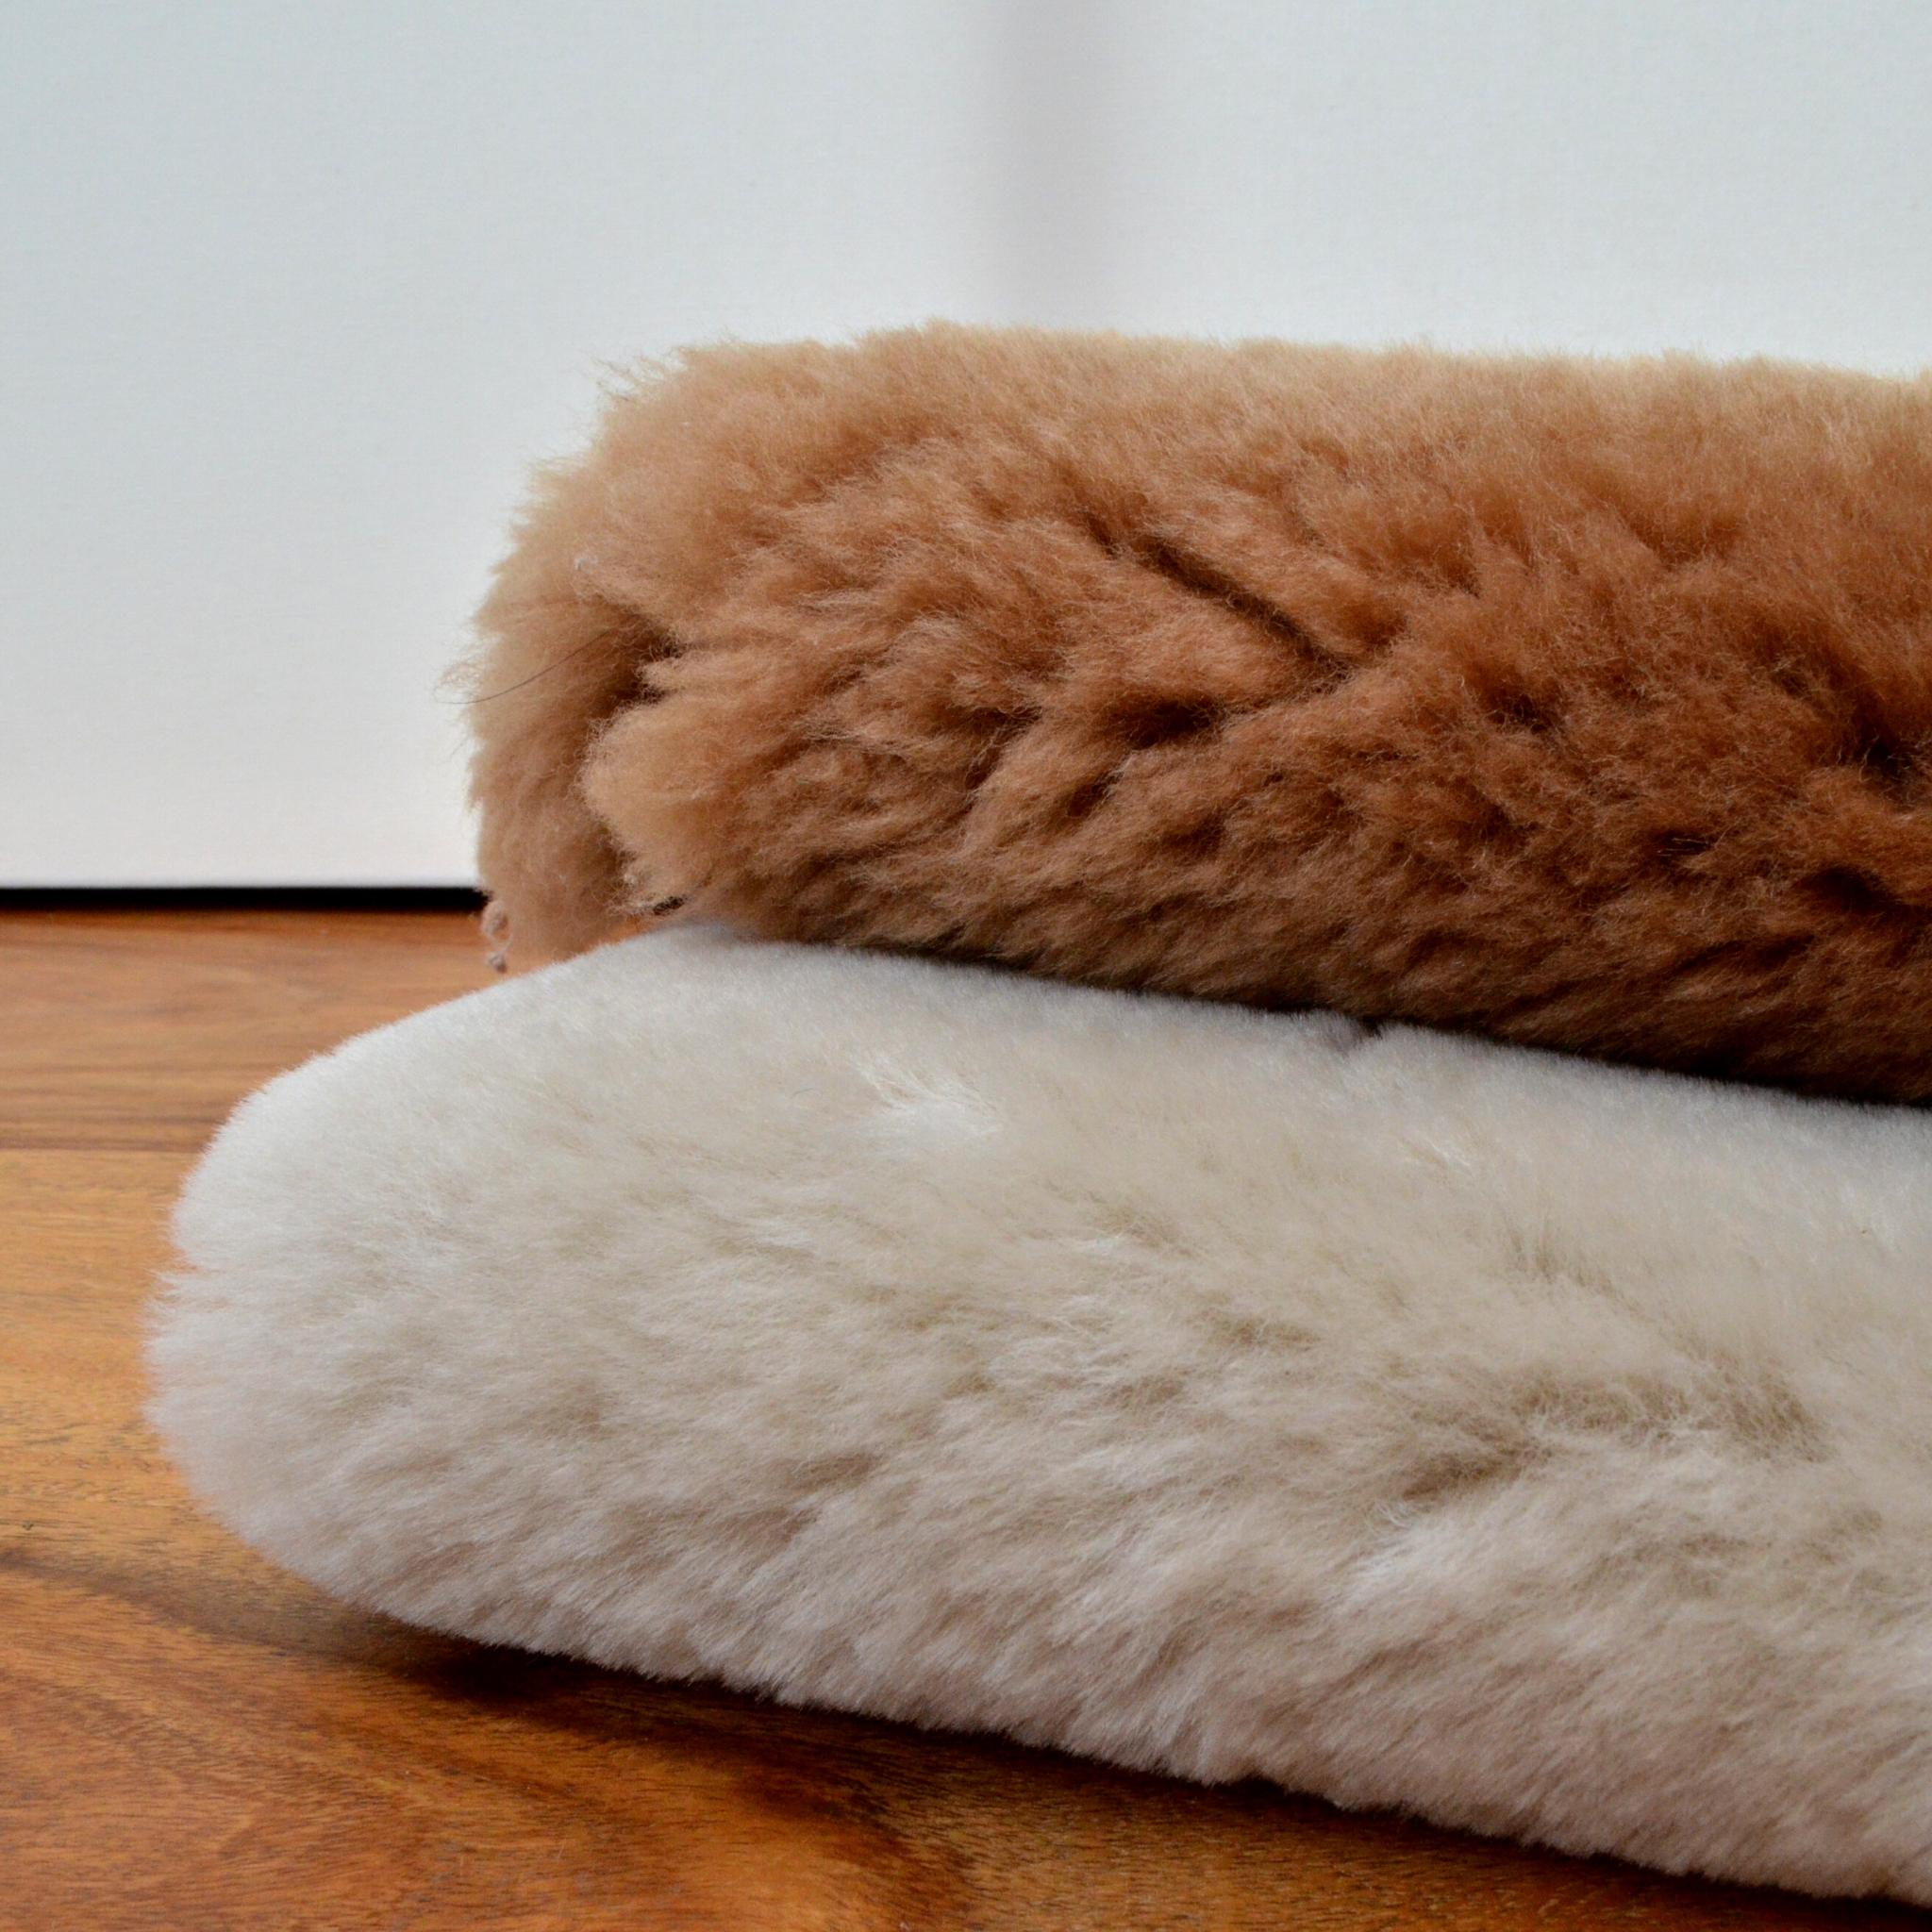 High end luxury sheepskin remnants with a medium depth pile 25mm, super soft. Ideal for pet beds, linings, cushions, camping and more